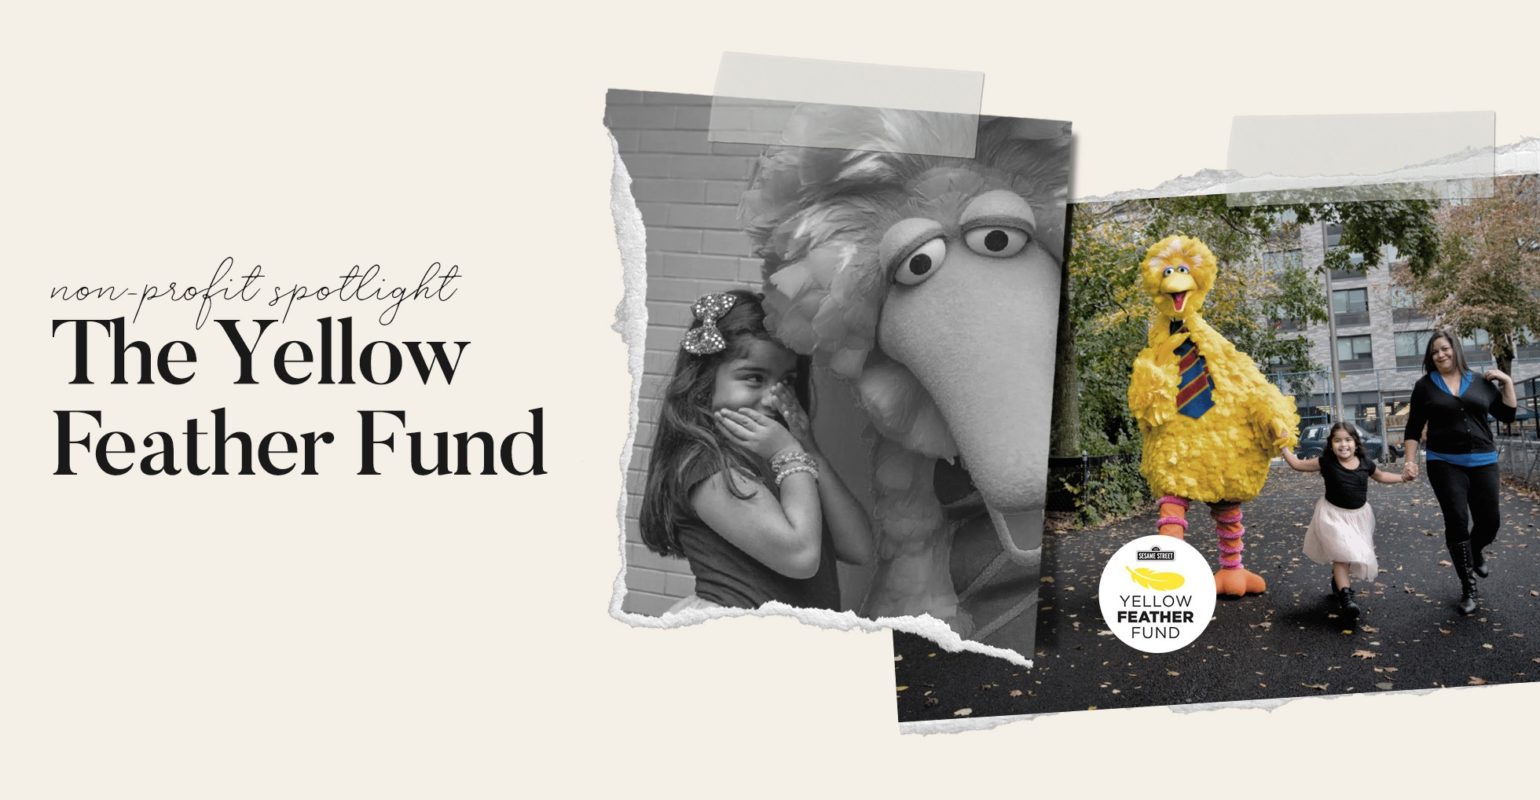 The Yellow Feather Fund